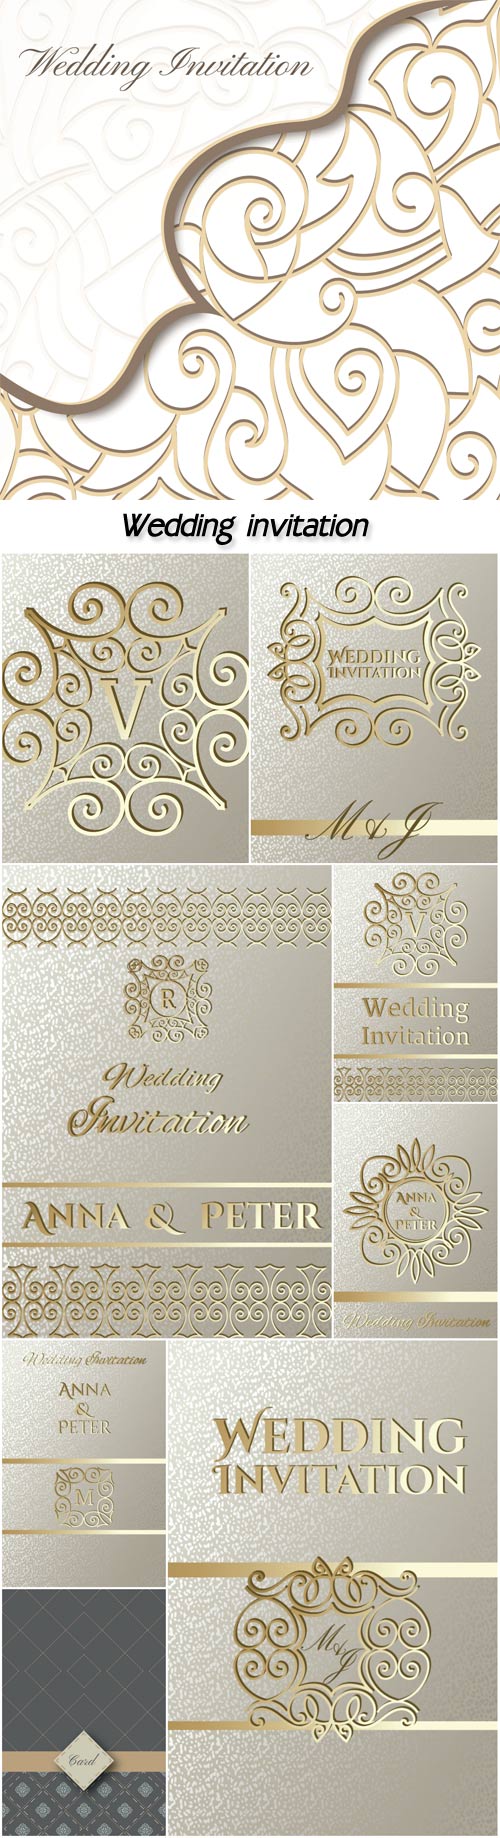 Wedding invitation, silver vector backgrounds with patterns